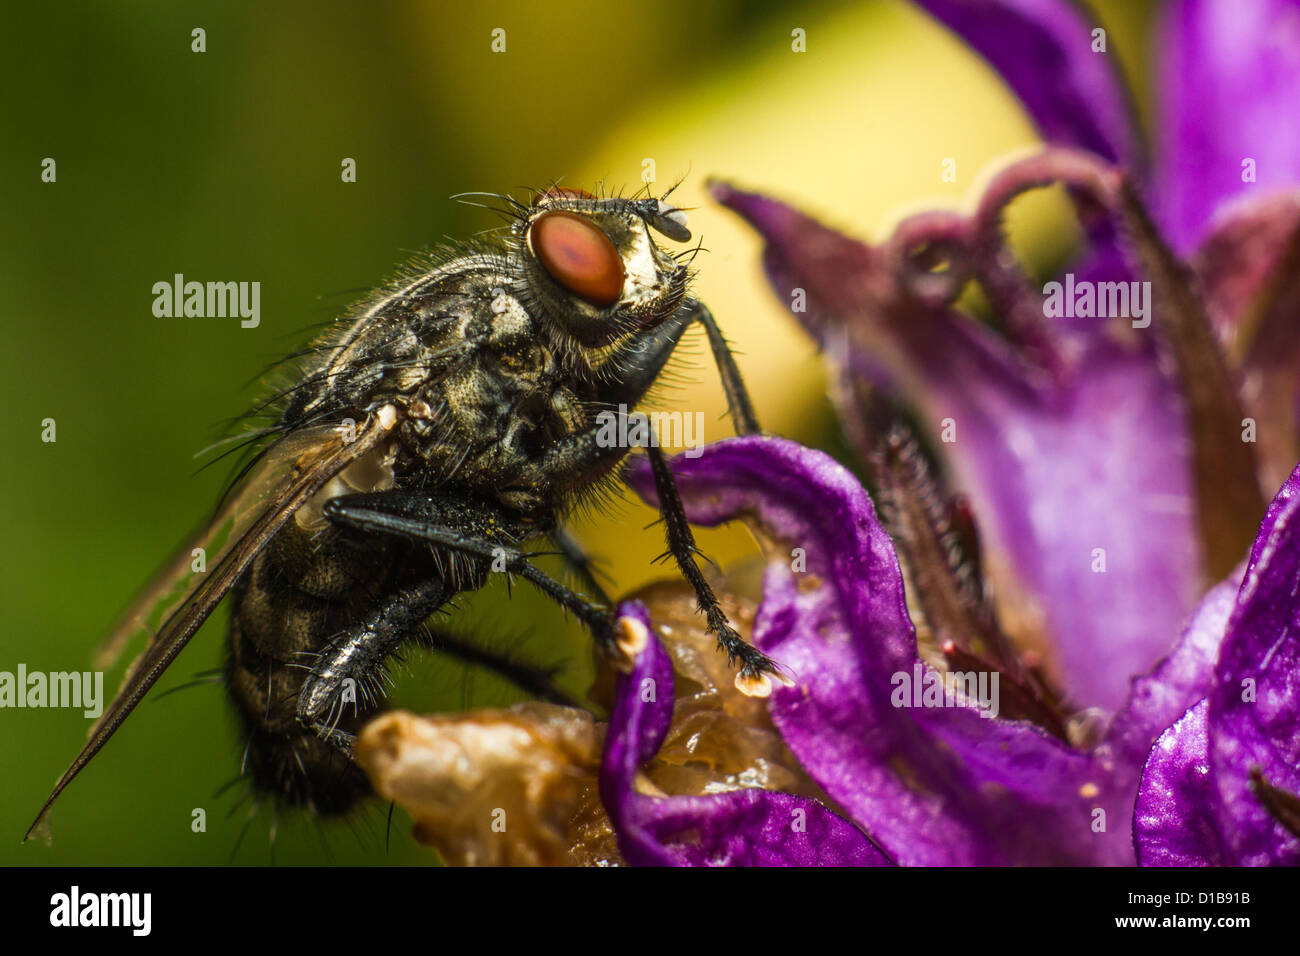 Portrait of a Fly Stock Photo